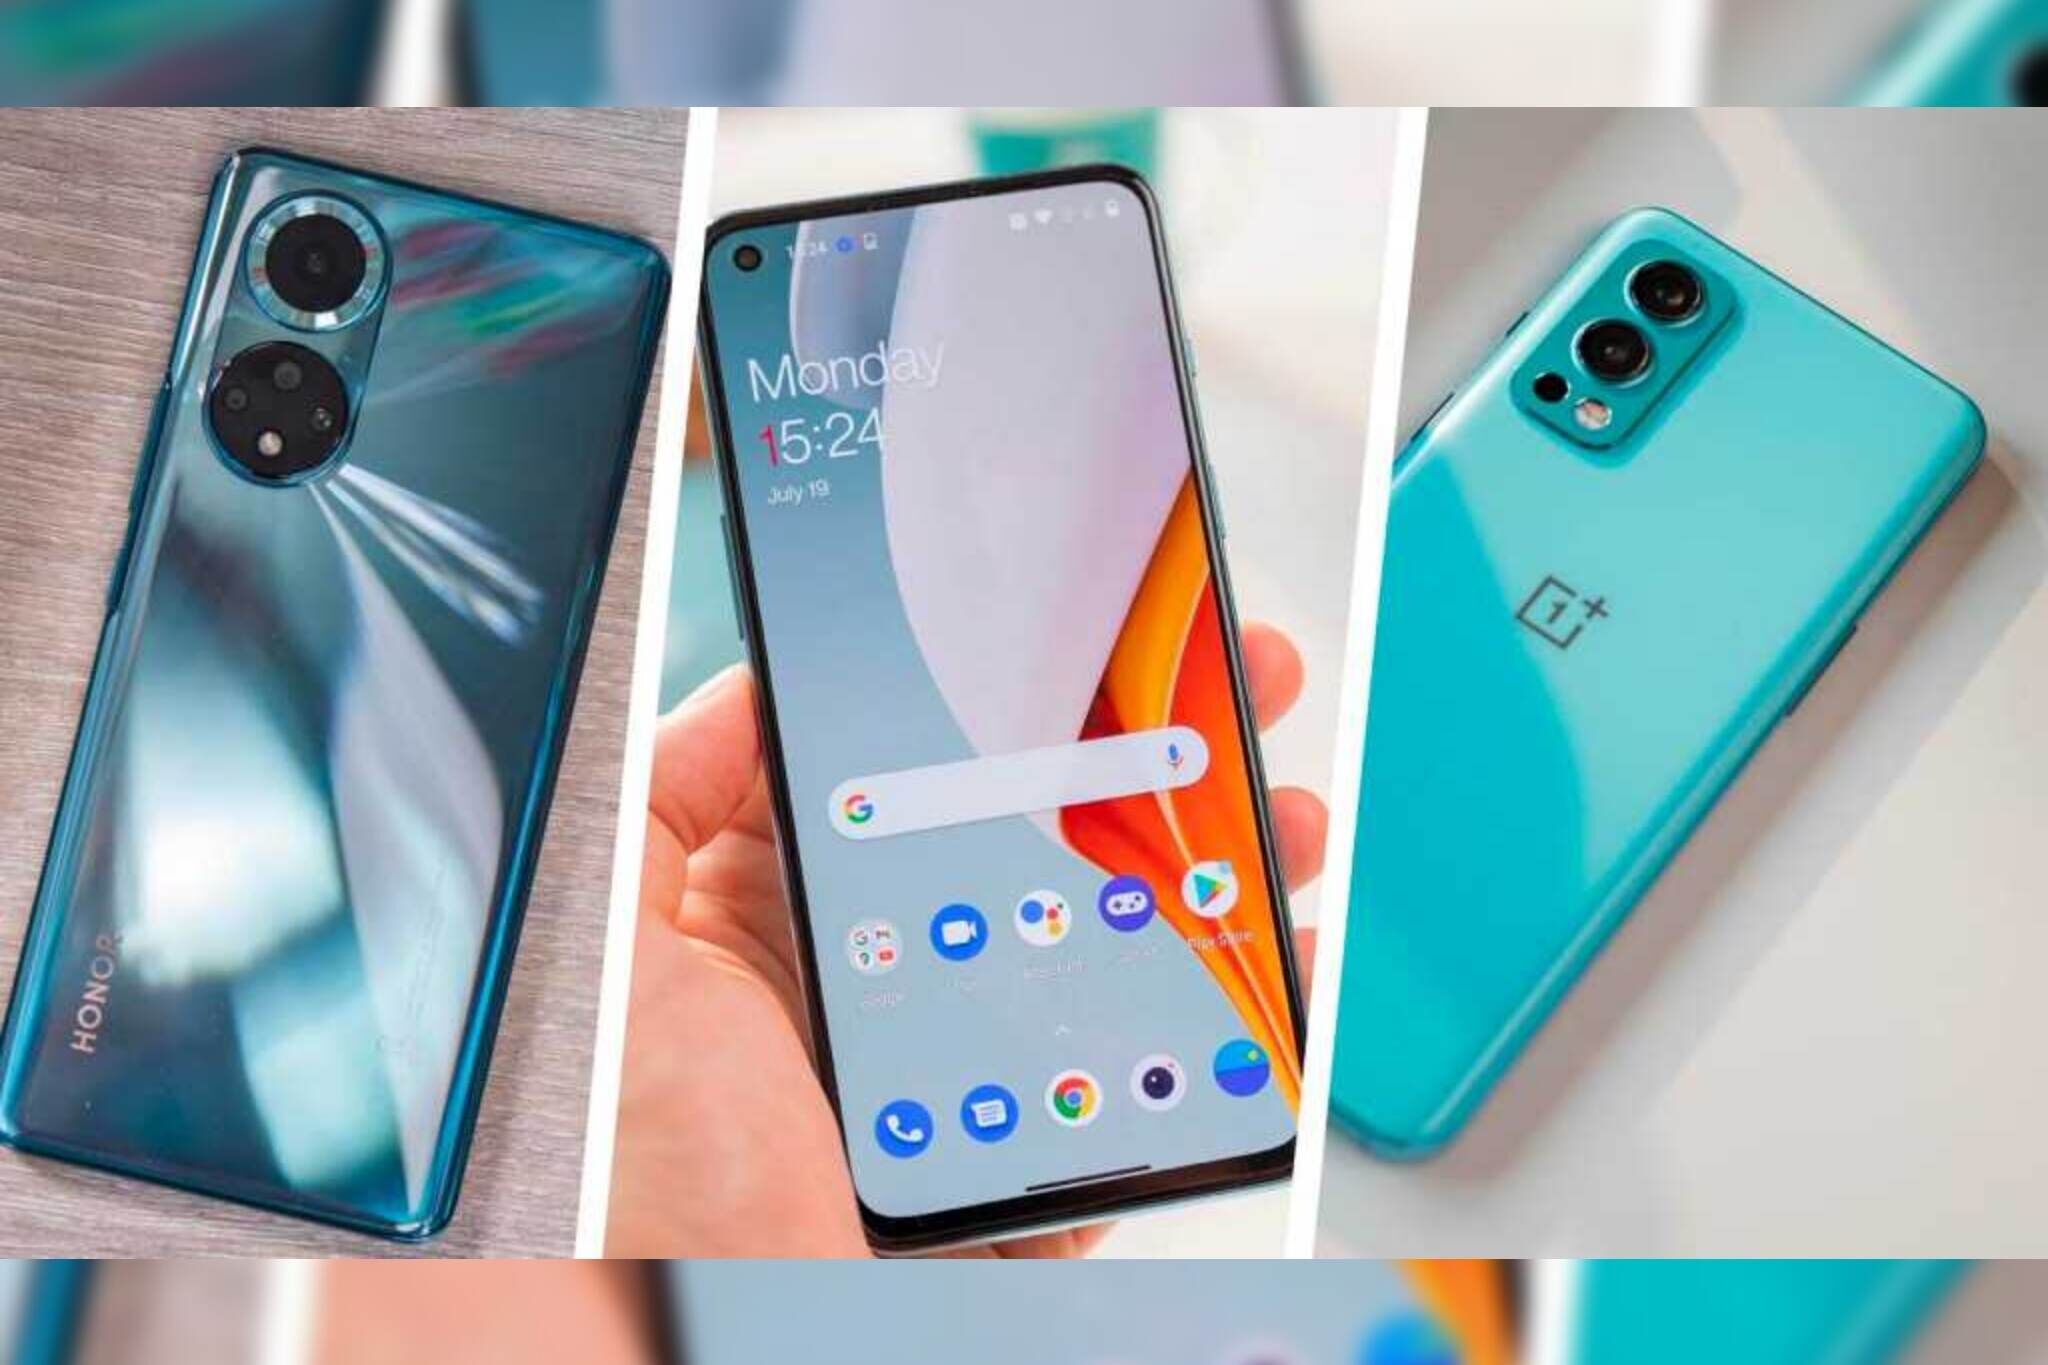 Upcoming Phone In December 2022: Great phones coming in December, including OnePlus and Vivo, these smartphones will debut